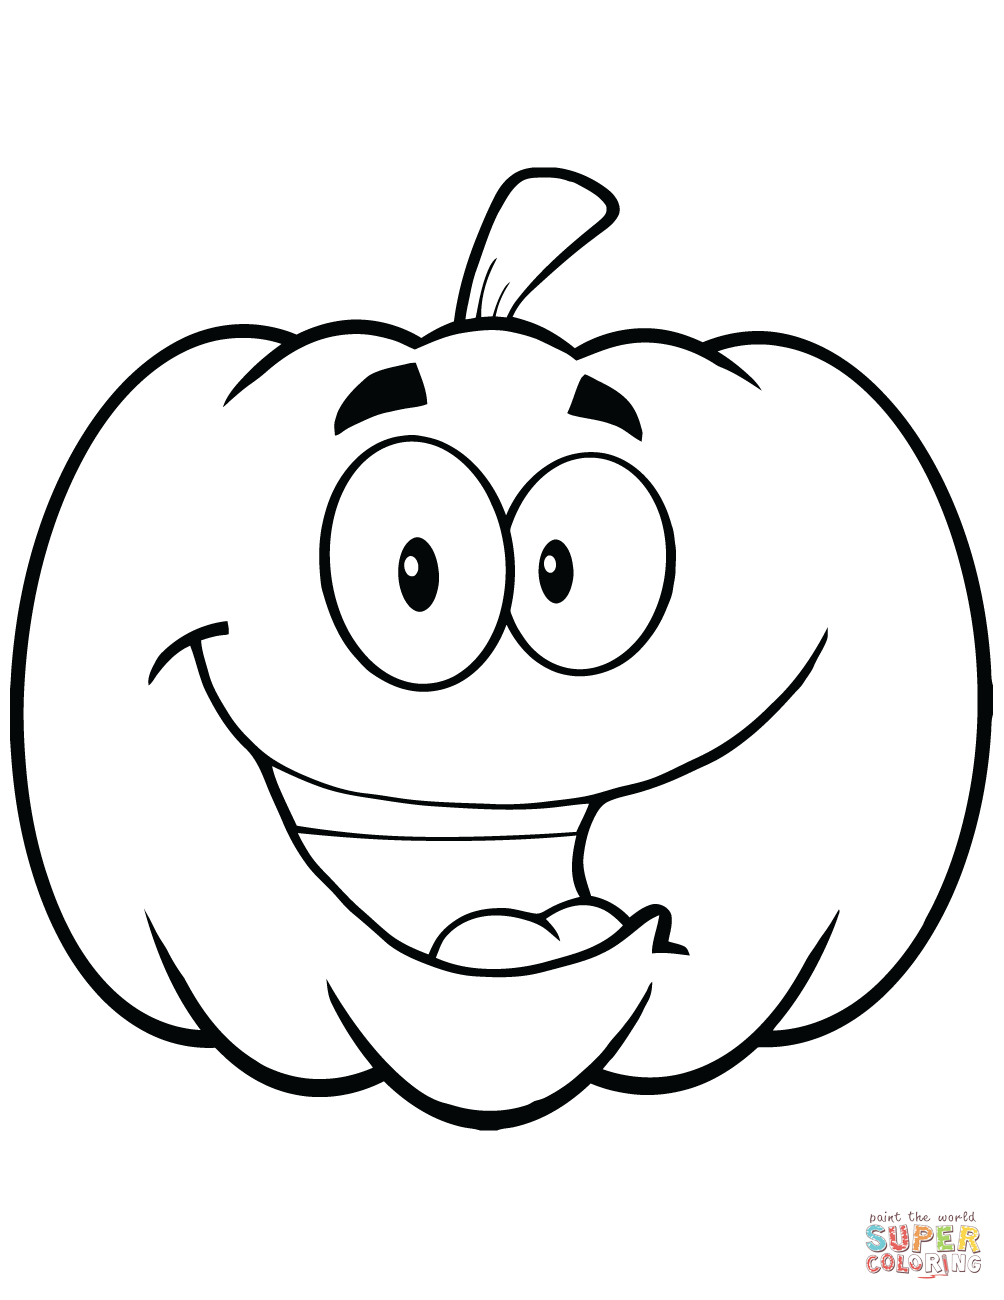 Halloween Pumpkin Coloring Pages Printables Coloring Pages Free Printable Halloween Pumpkining Sheets For Kids